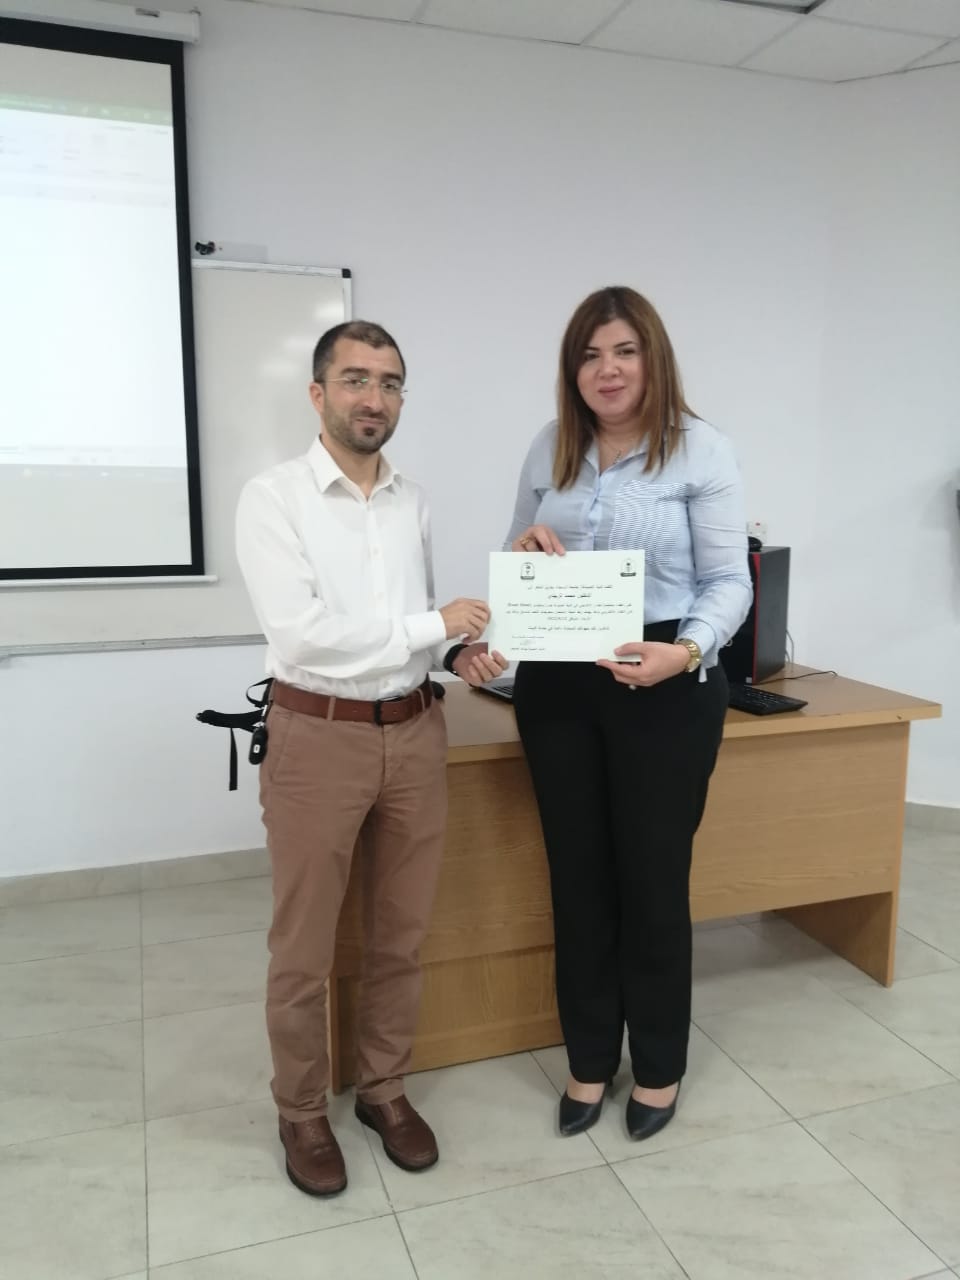 A workshop on the use of excel sheets in the electronic system was held at the Faculty of Pharmacy